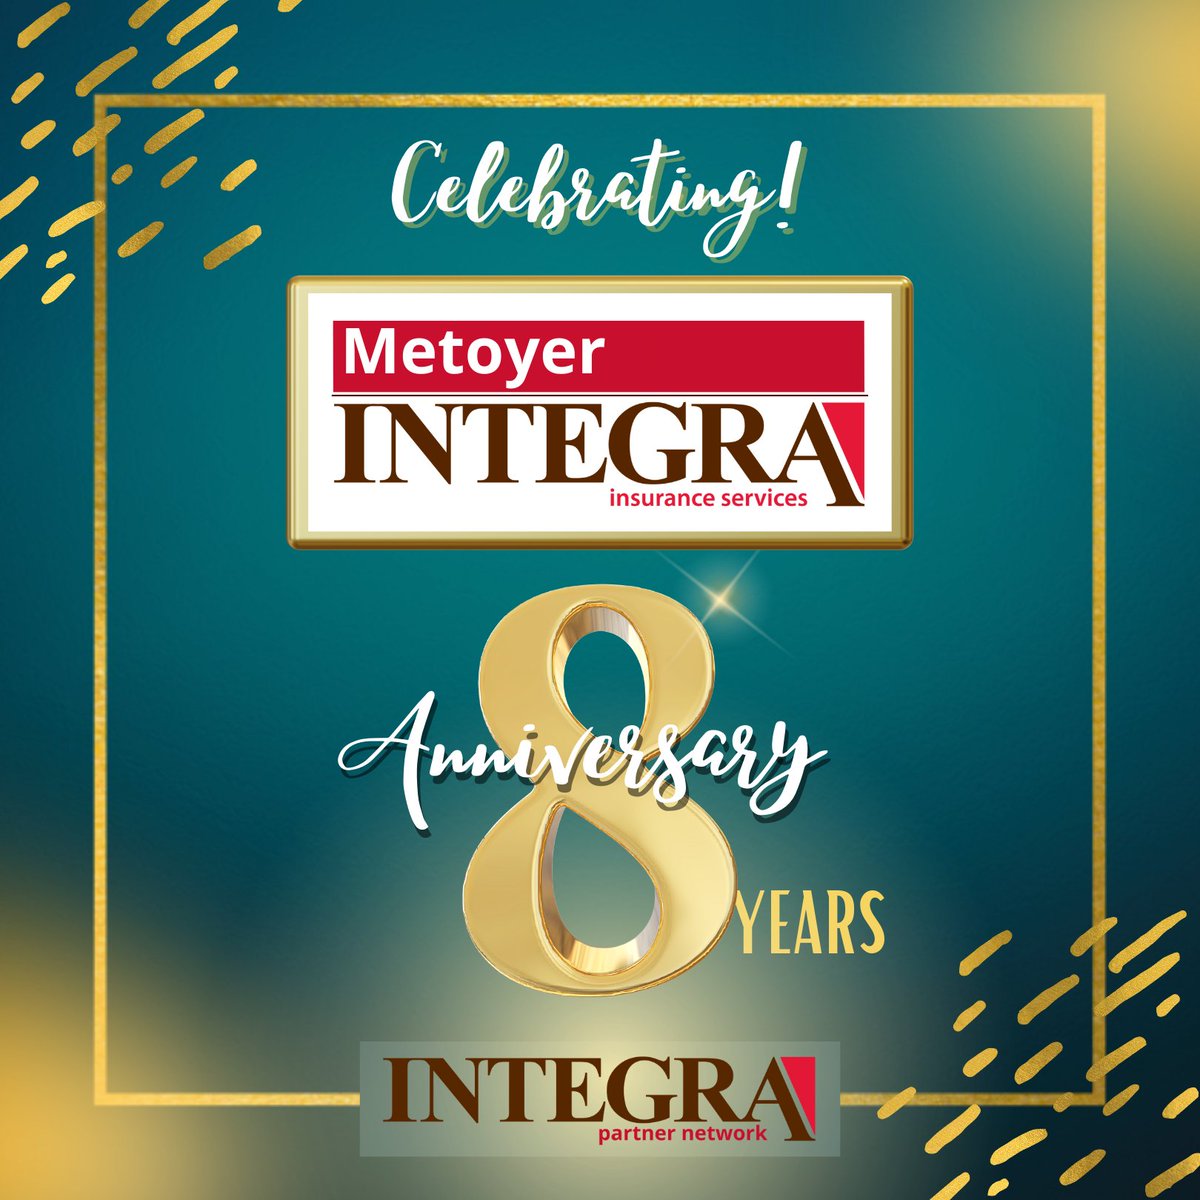 Excited to celebrate 8 years of success with Metoyer Integra Insurance and the Integra Partner Network!

Are you ready to find your way with Integra?

#integrapartnernetwork #independentagent #findyourway #integra #insurance #insuranceagent #insuranceagency #integrainspires